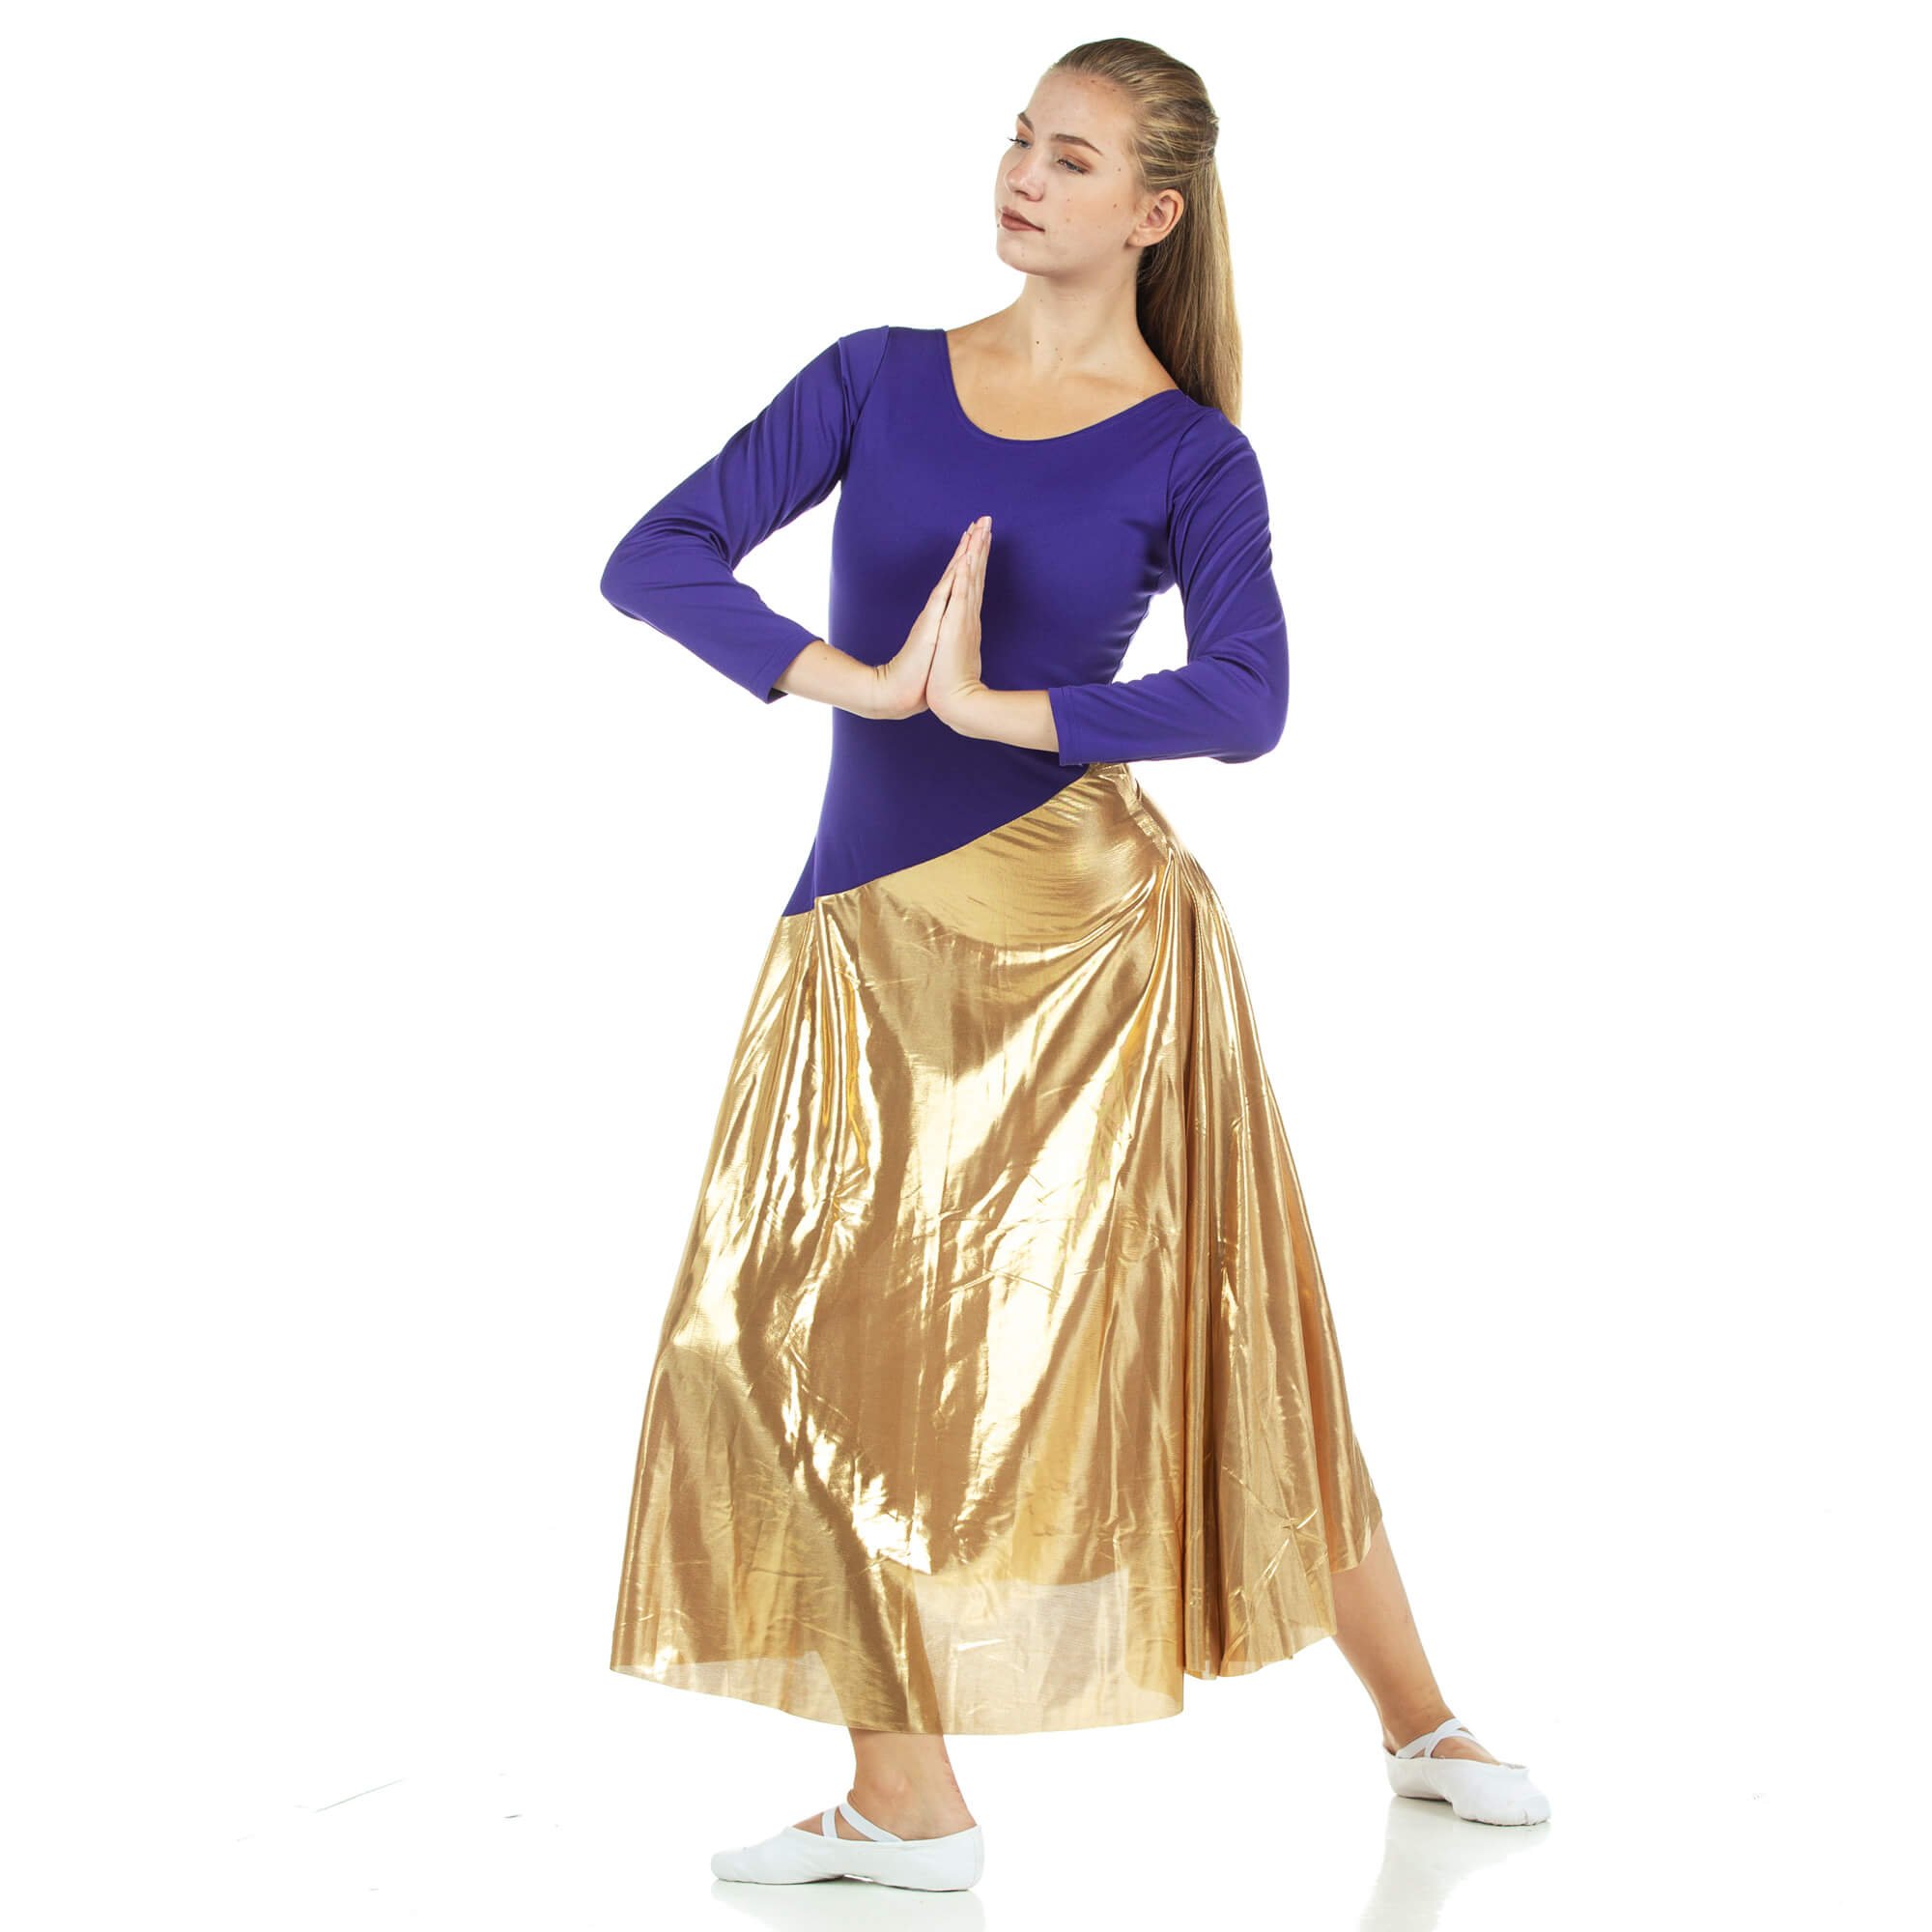 Danzcue Bi Color Long Sleeve Ministry Dance Dress - Click Image to Close